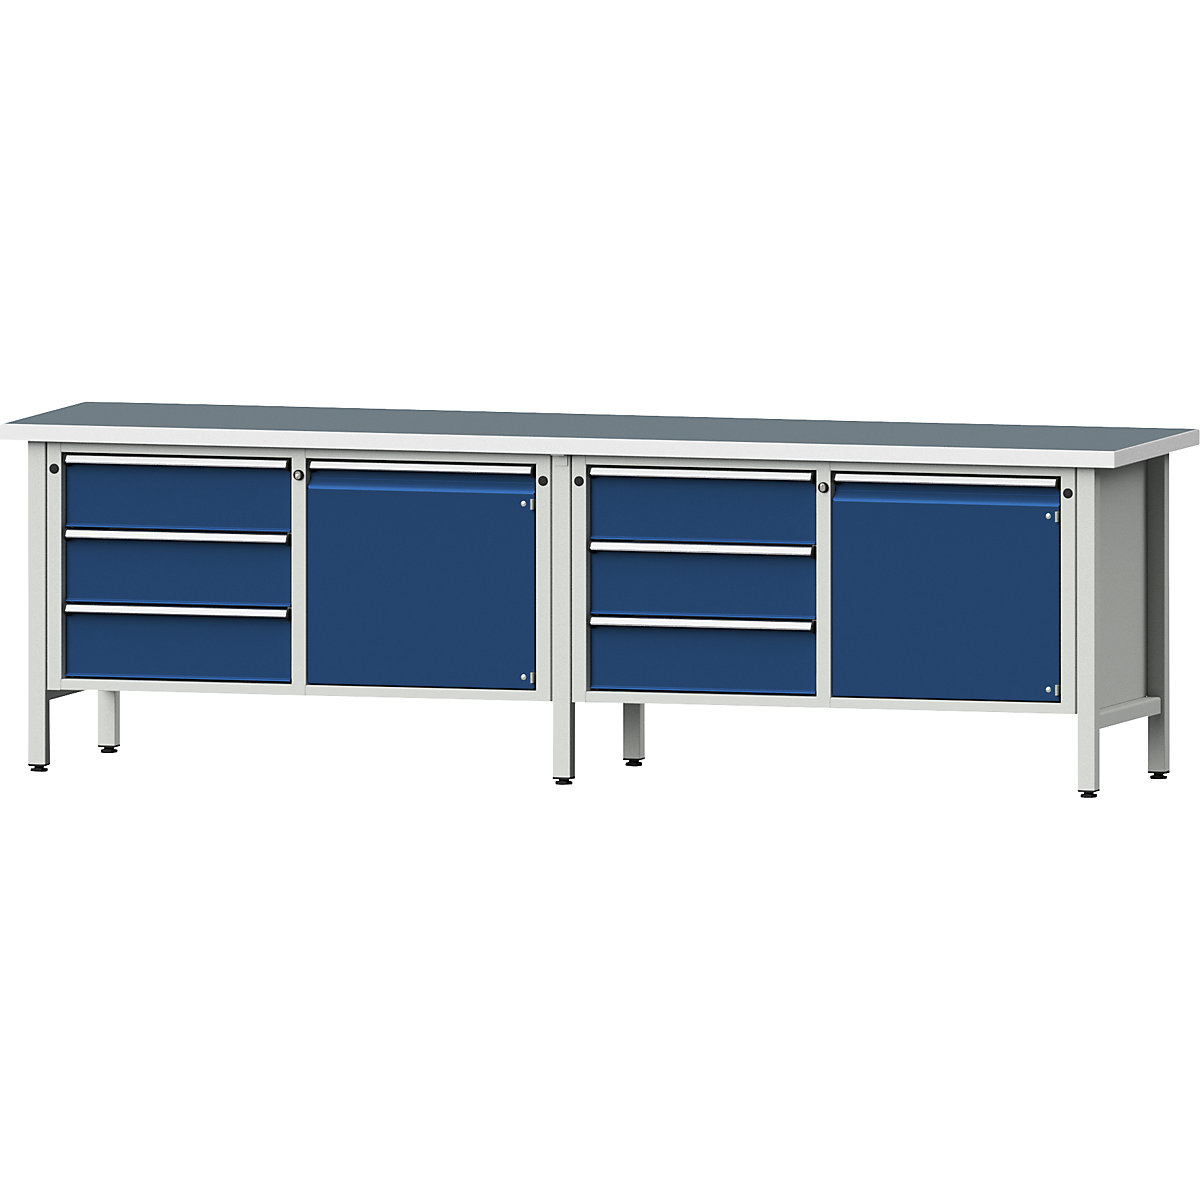 Workbench width 2800 mm, frame construction – ANKE, 2 doors, 6 drawers with partial extension, universal worktop-10